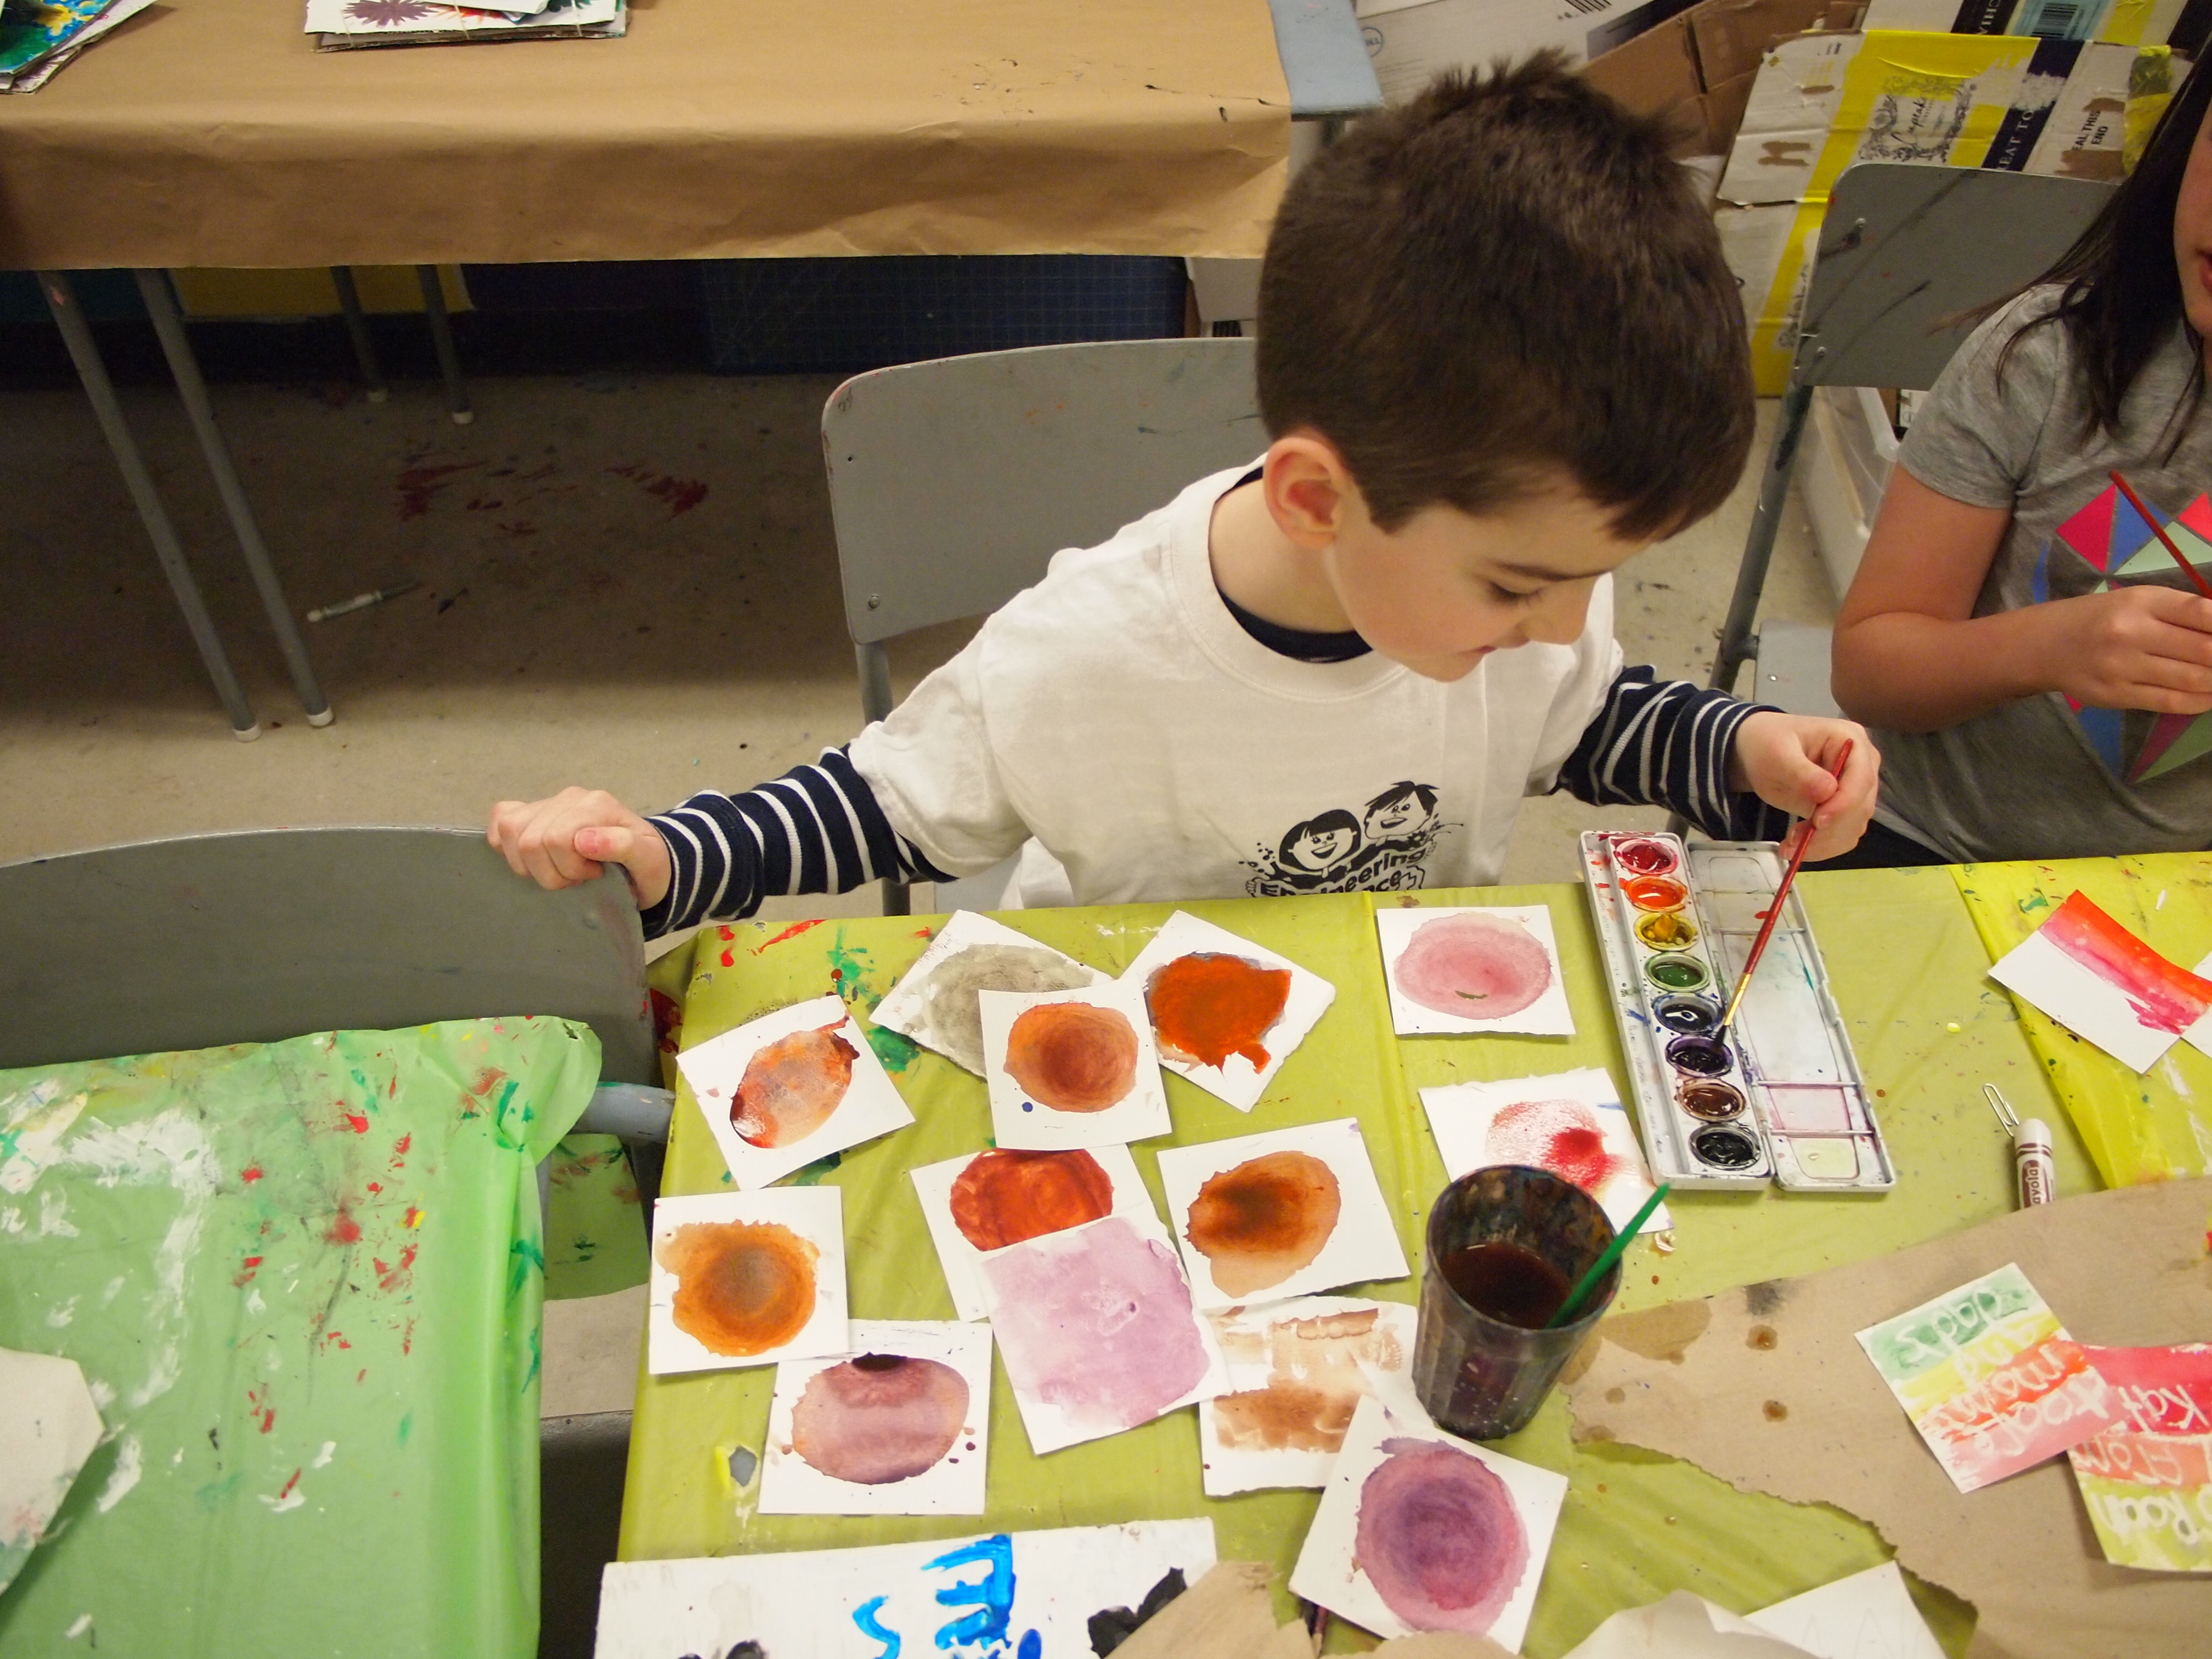 A young boy experiments with painting many coloured swatches on small pieces of paper in the KWAG studio